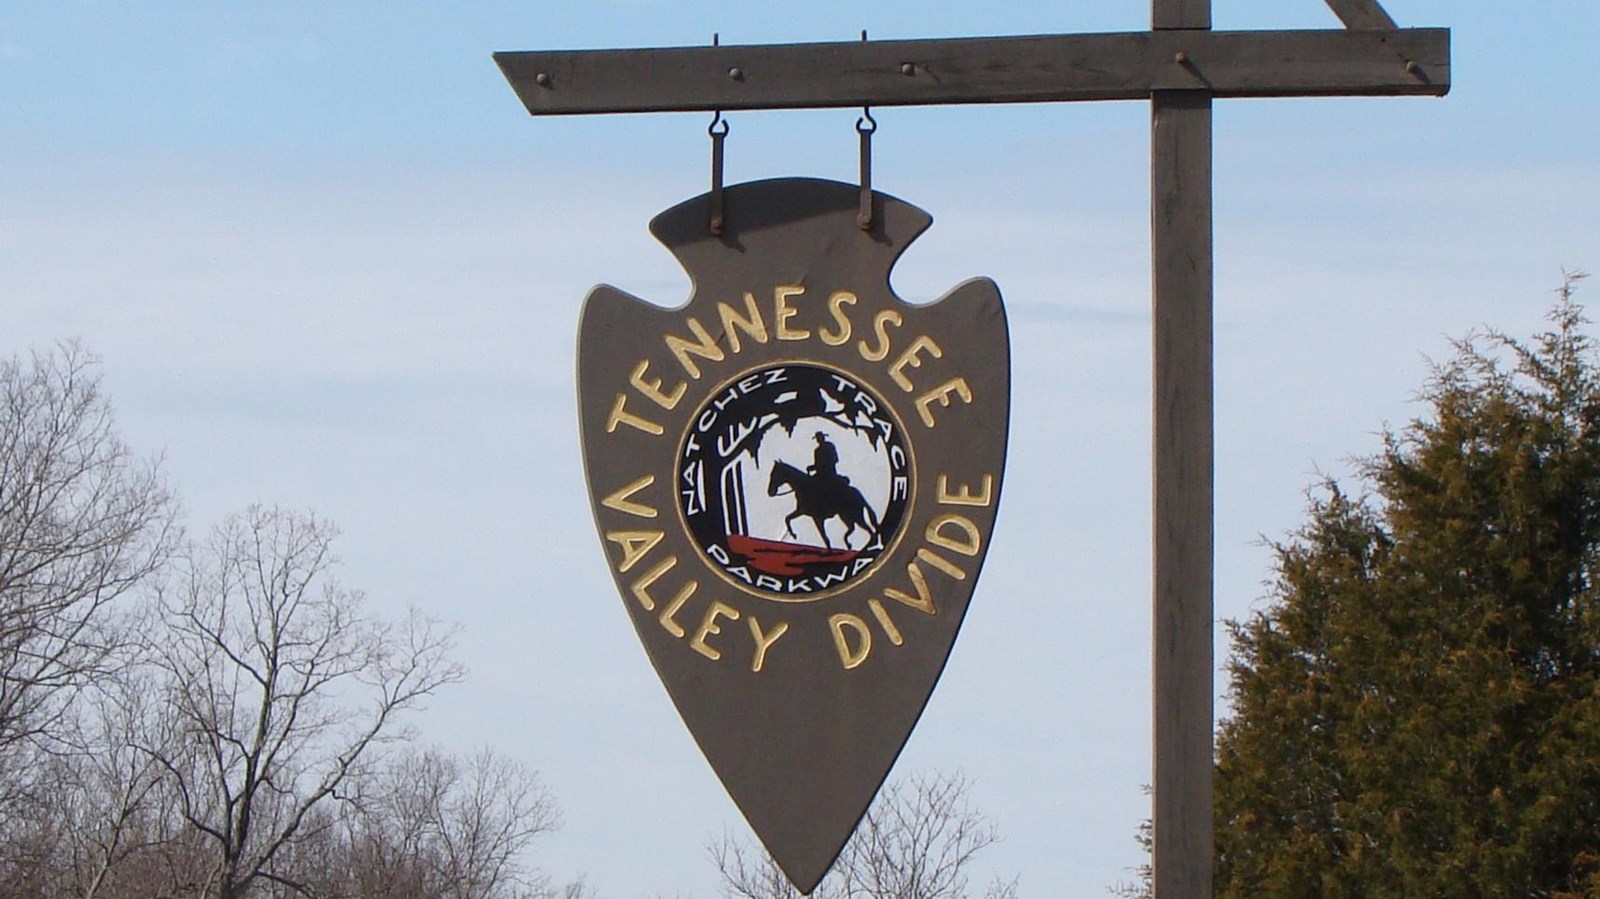 Sign in the shape of an arrowhead marking the entrance to the Tennessee Valley Divide site.